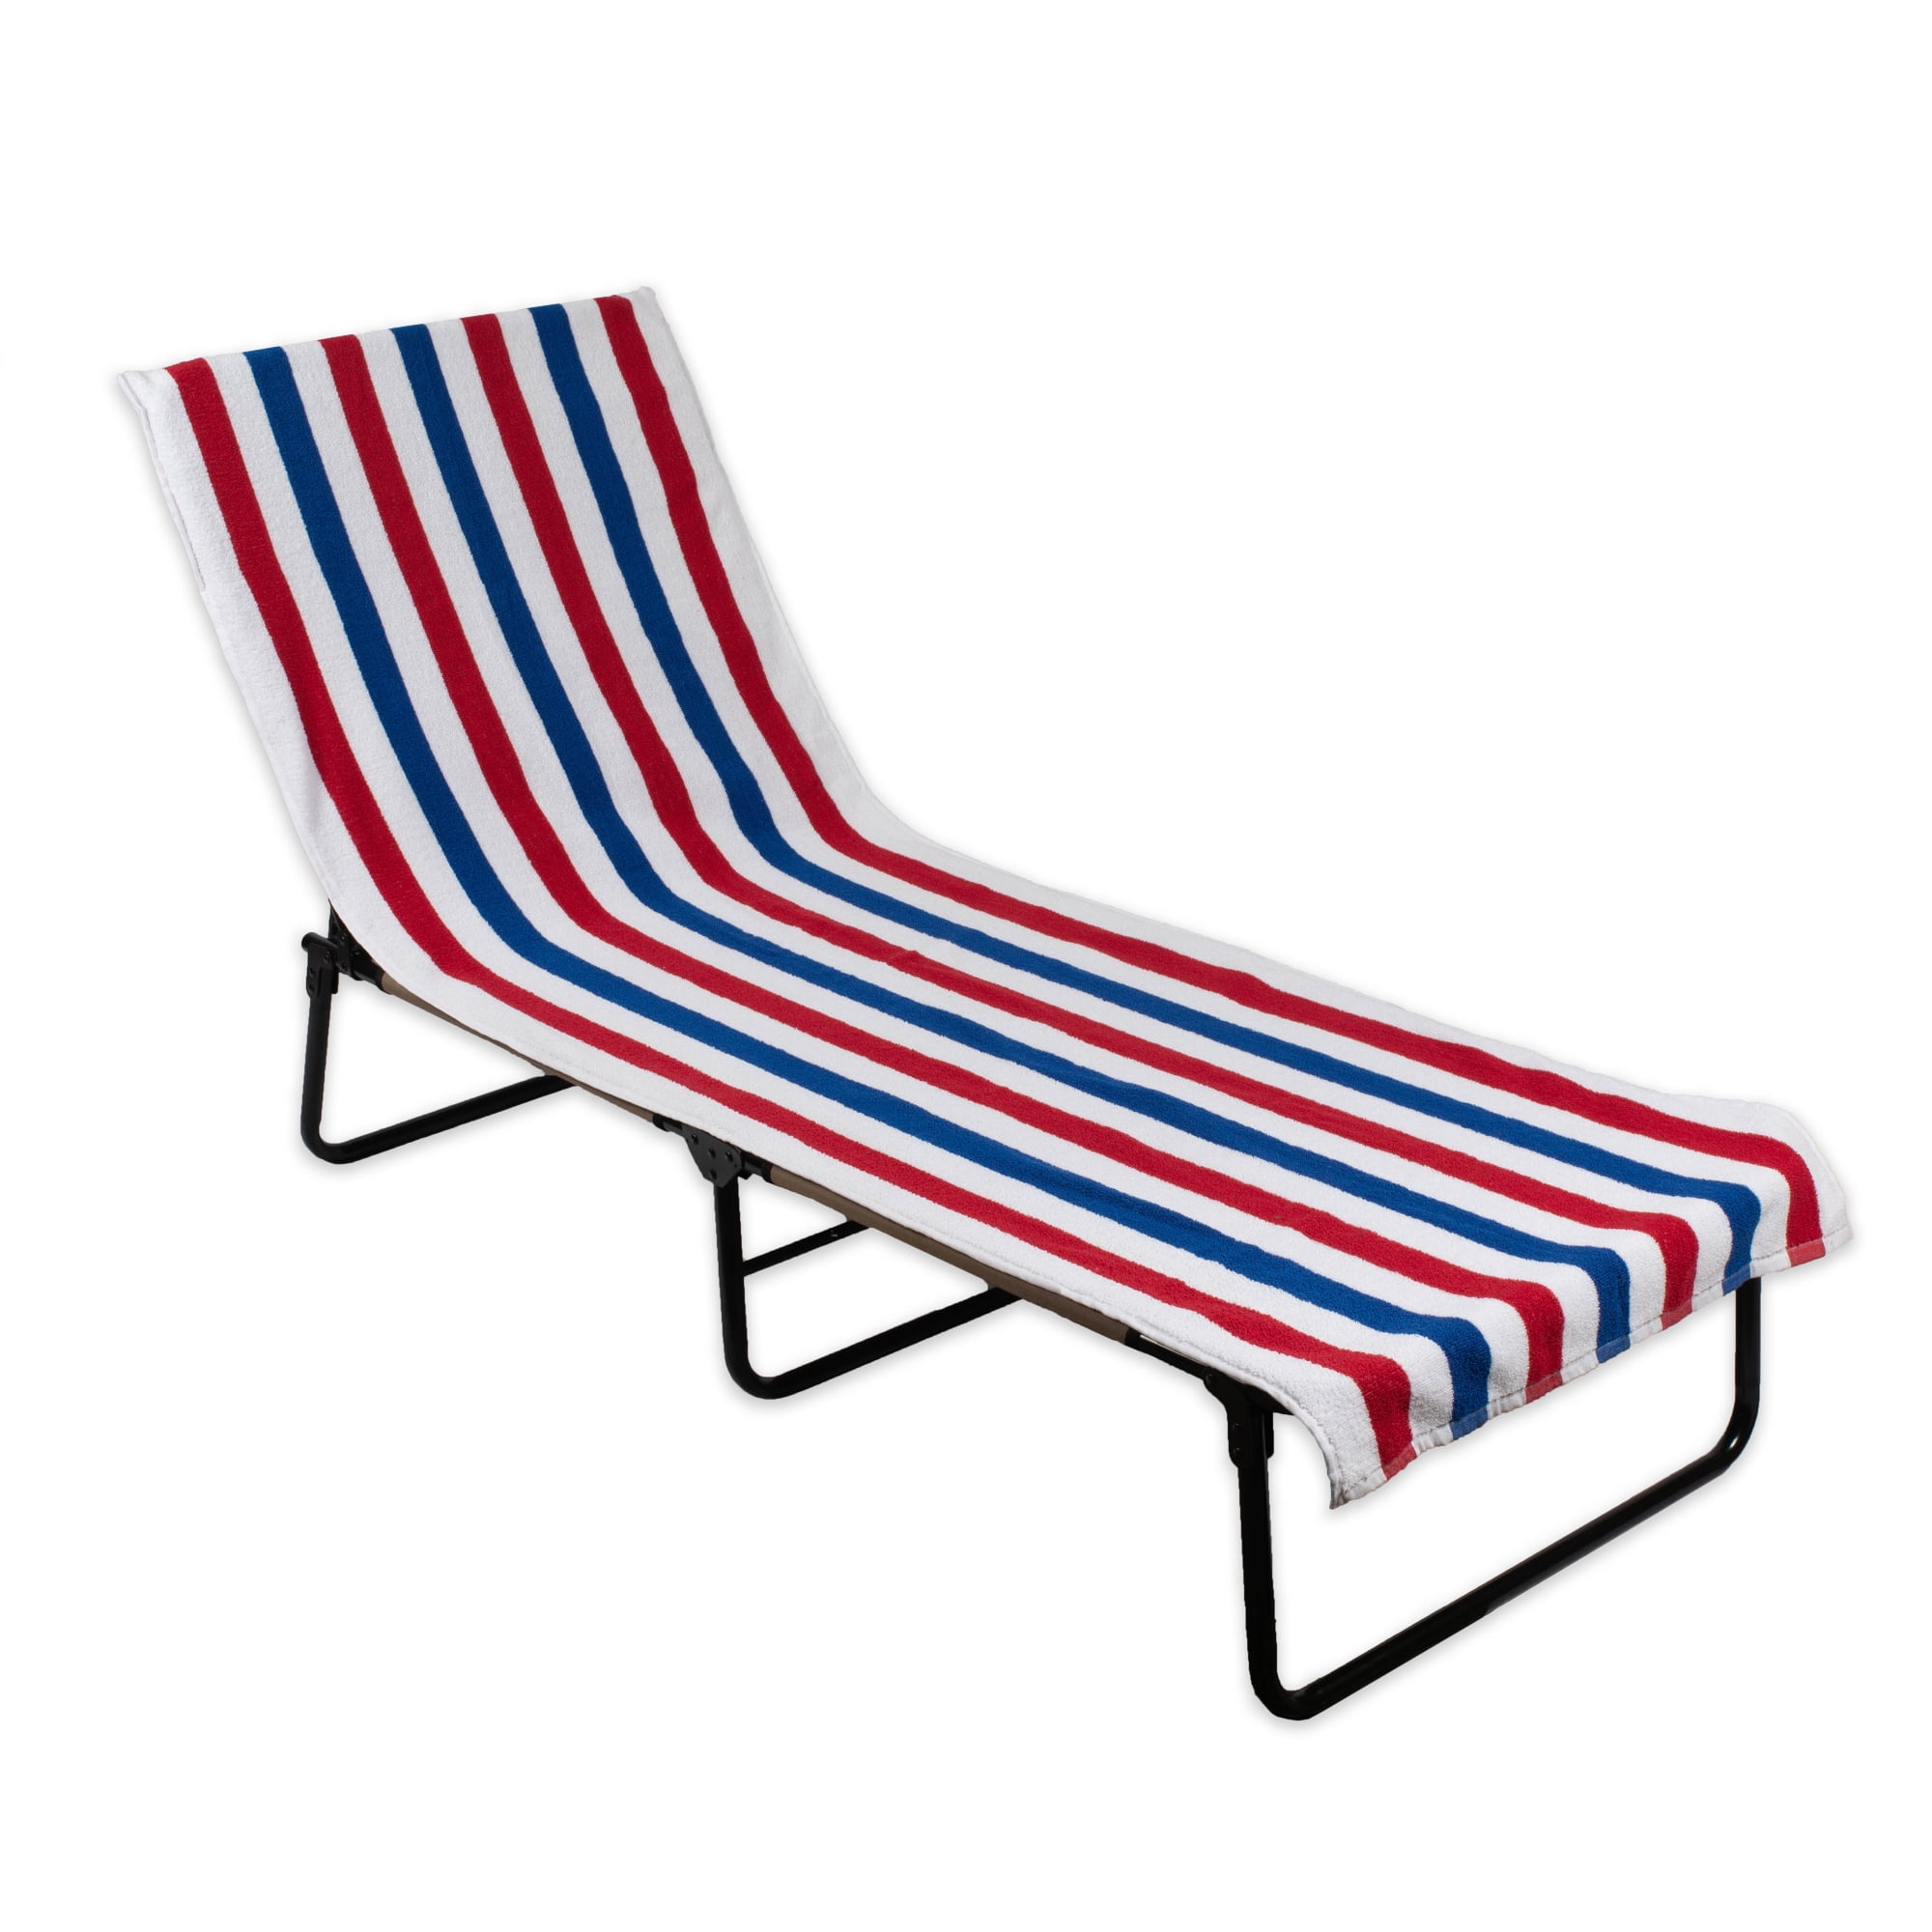 Red, White & Blue Stripe Lounge Chair Beach Towel With Top Pocket, 26 ...